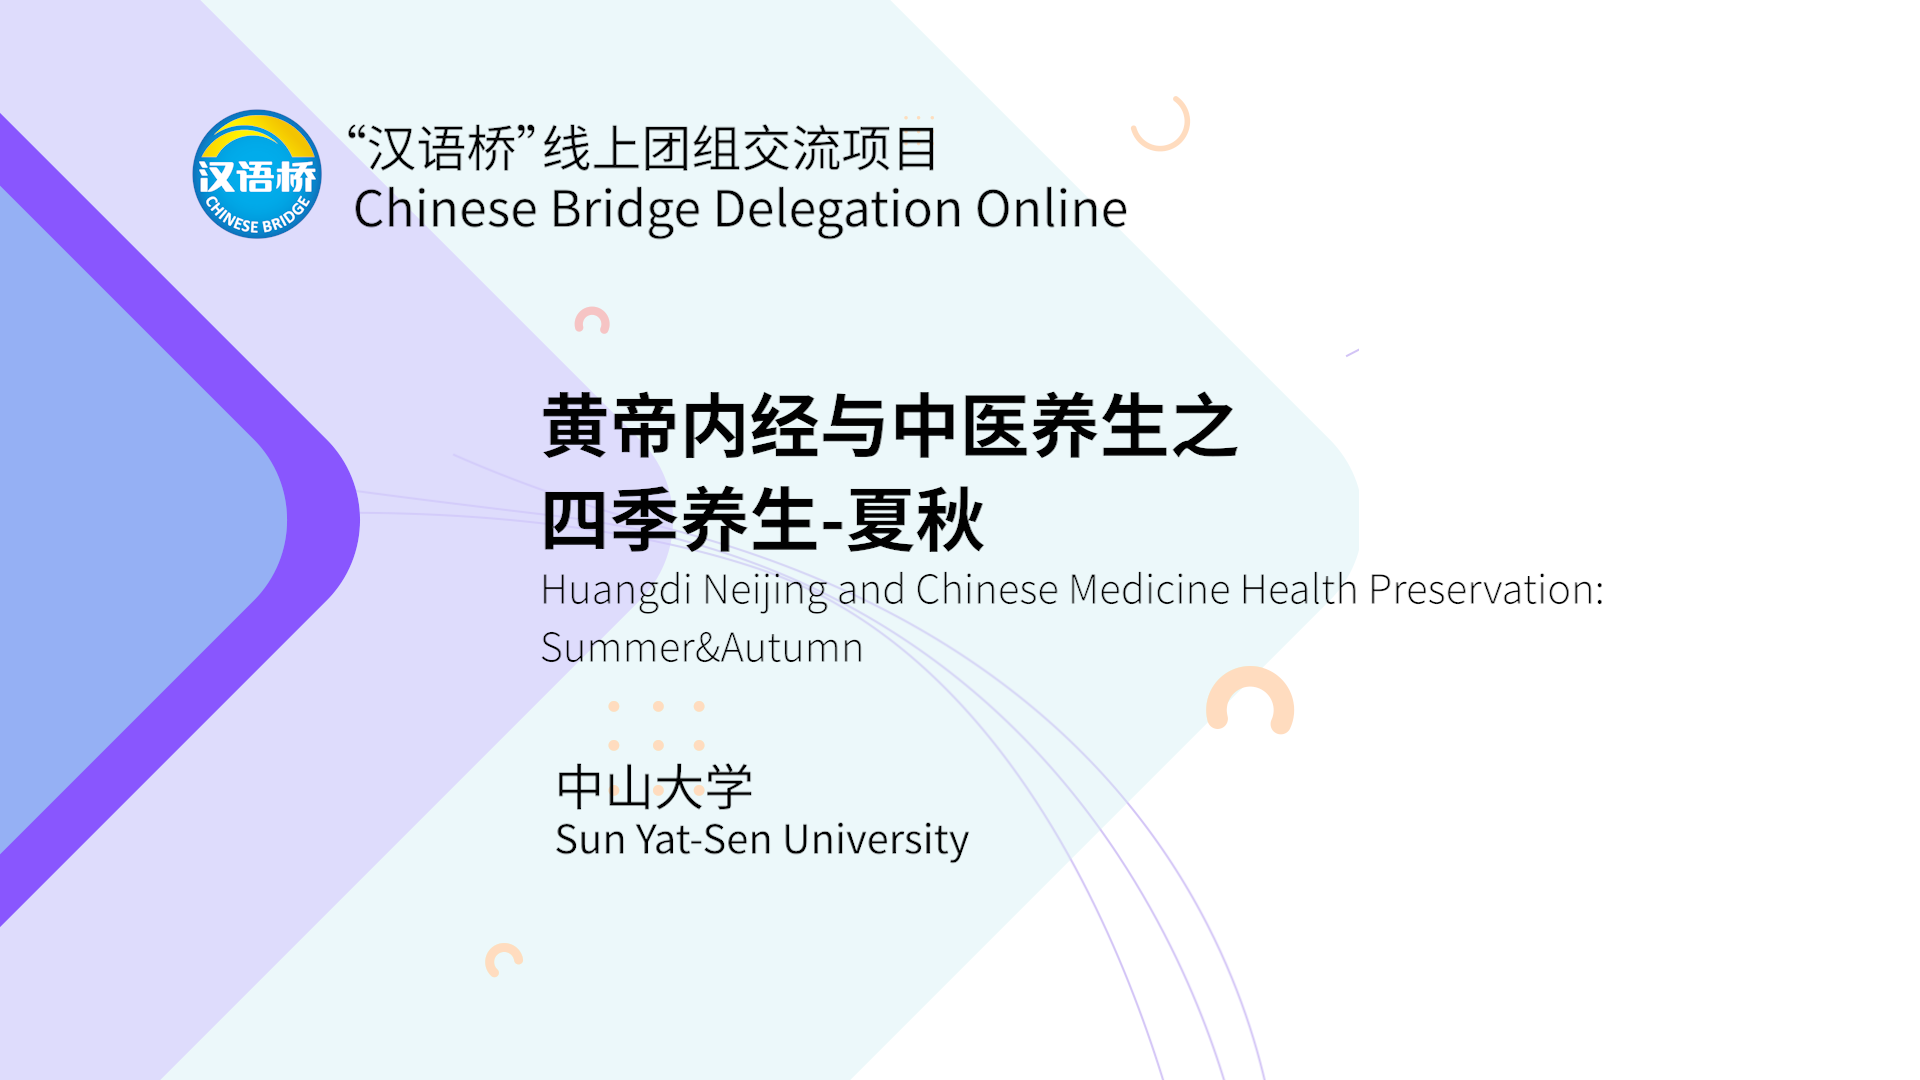 Huangdi Neijing and Chinese Medicine Health Preservation-Summer&Autumn